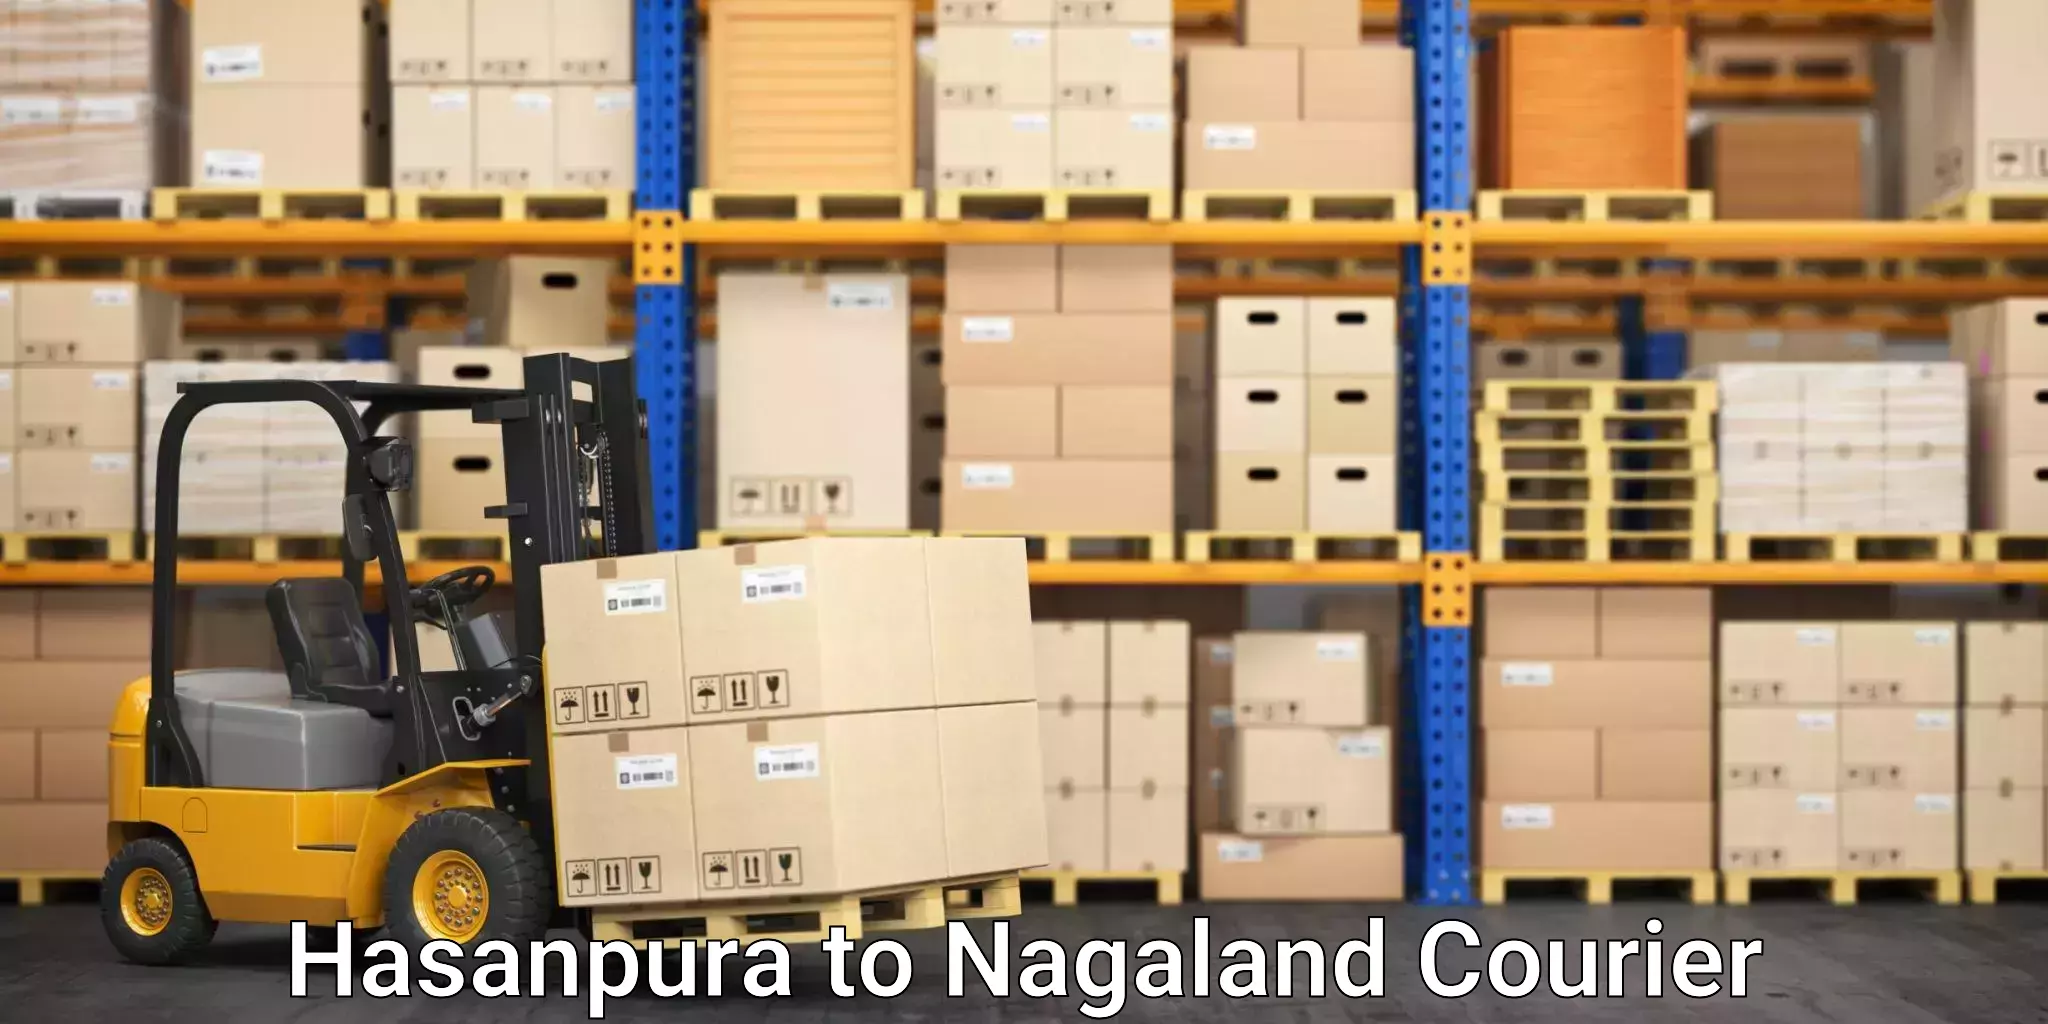 Furniture transport services in Hasanpura to Nagaland